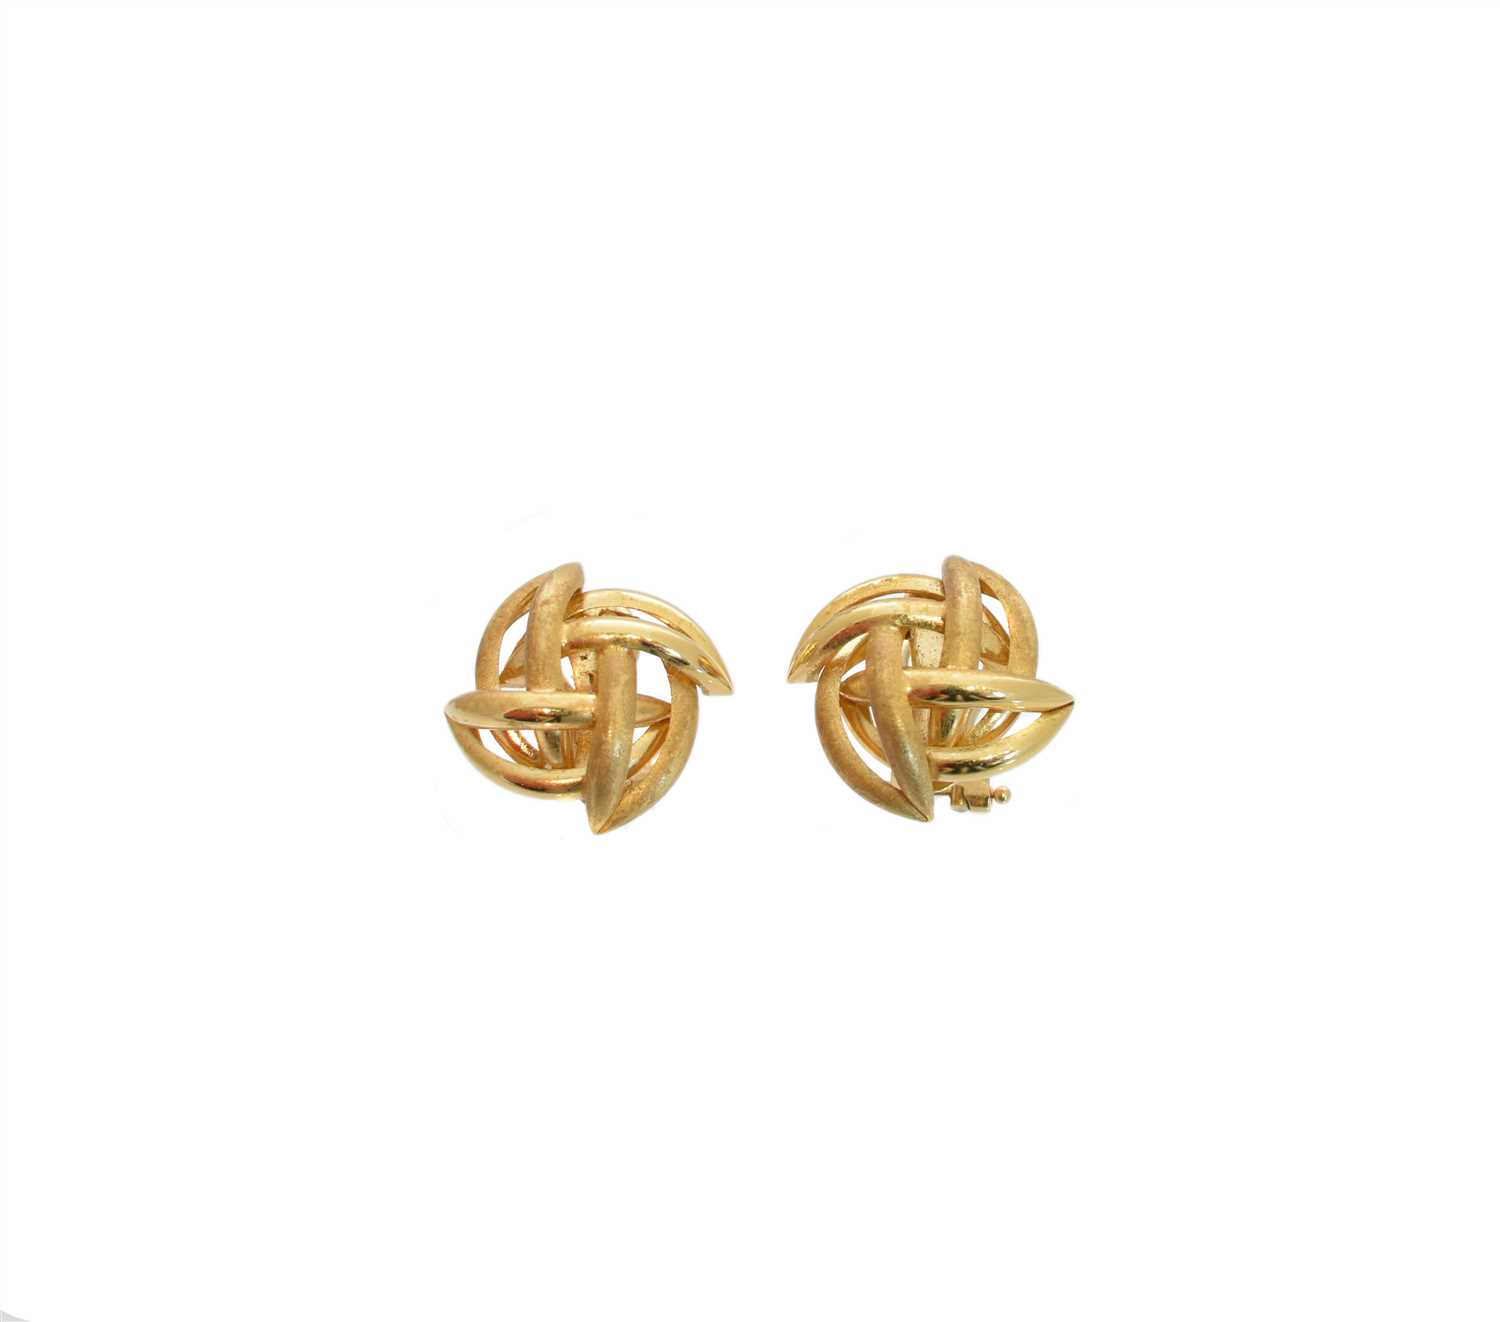 Lot 102 - A pair of knot earrings